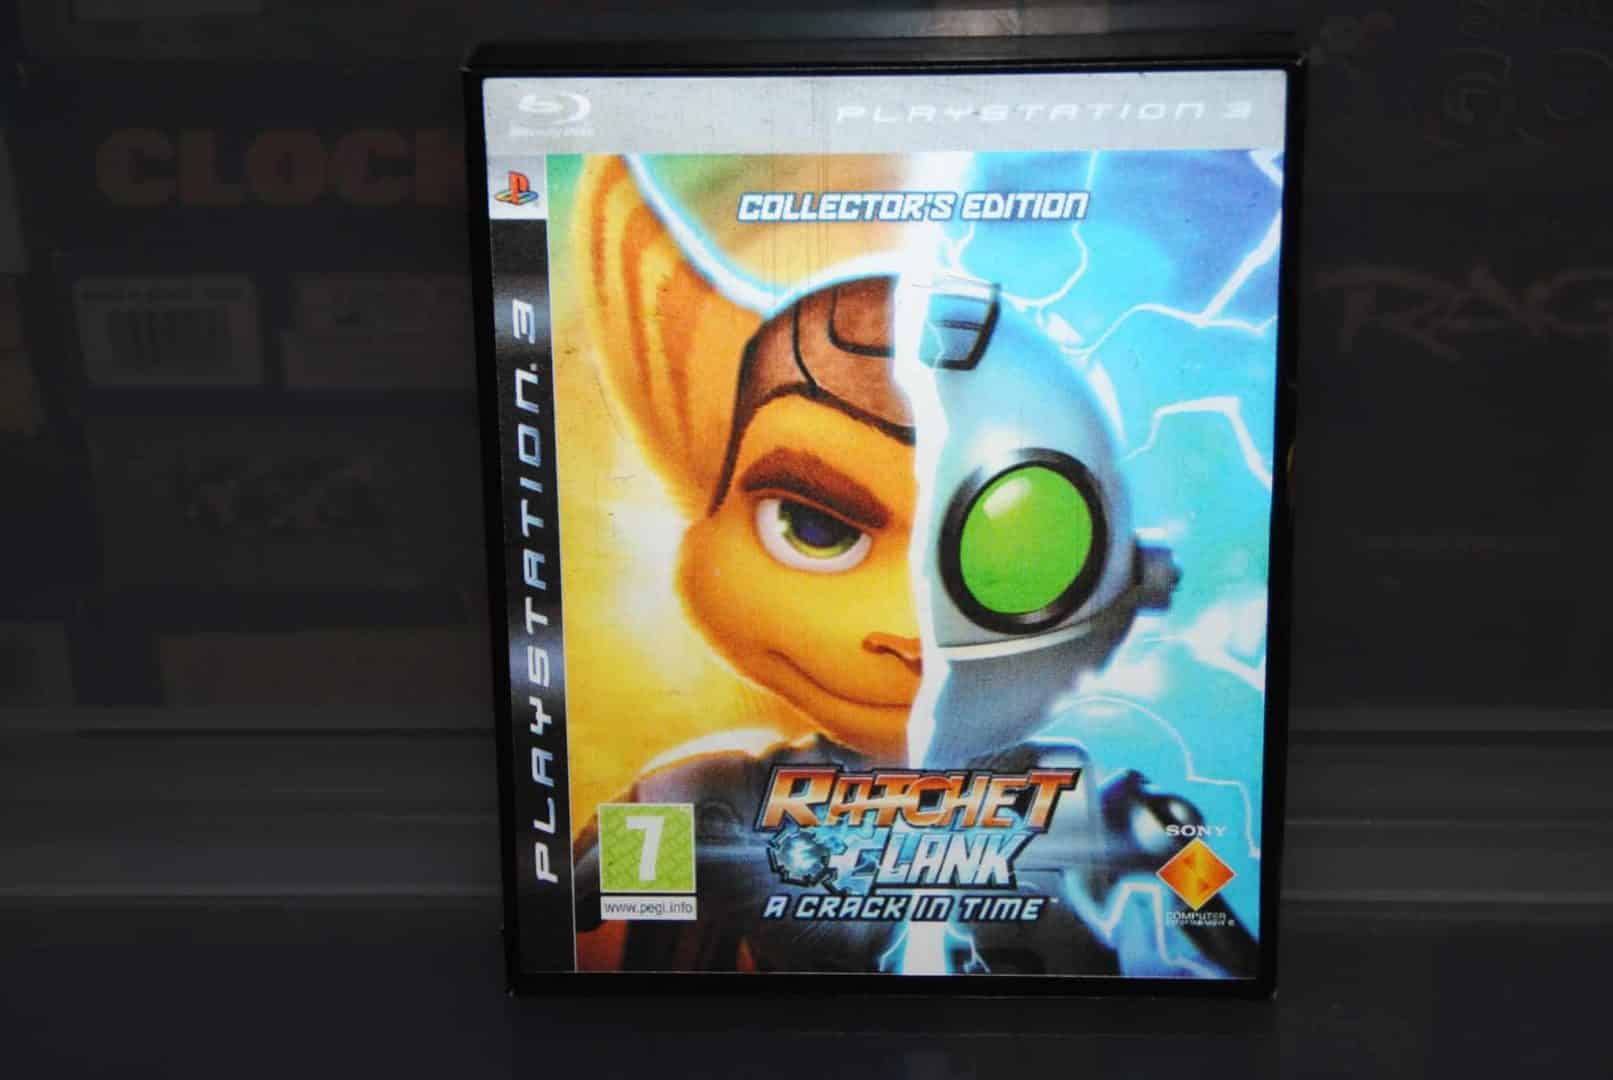 Ratchet & Clank A Crack In Time. Best game in the series?